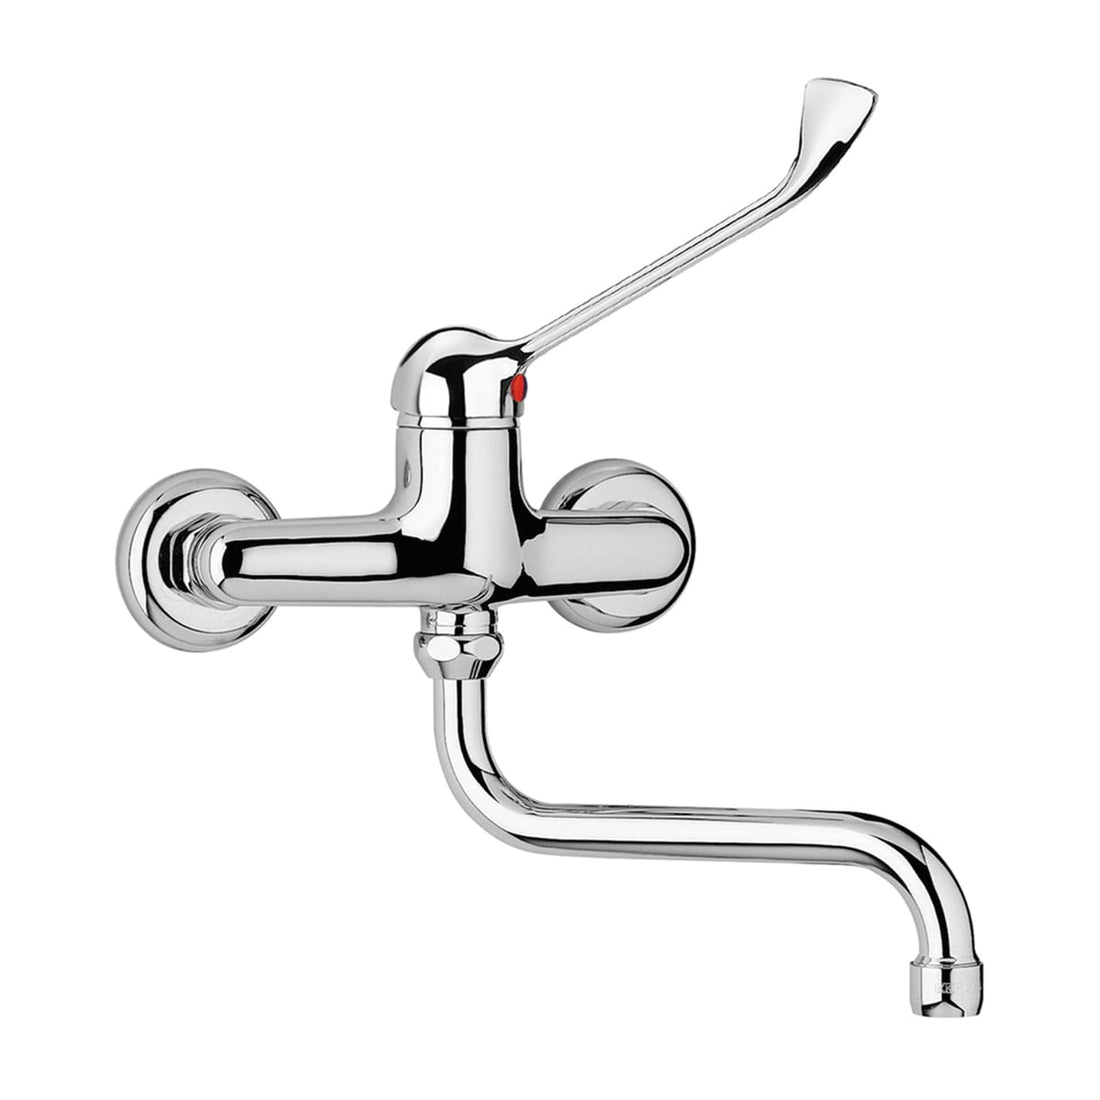 WALL-MOUNTED SINK MIXER PRIME CLINICAL LEVER